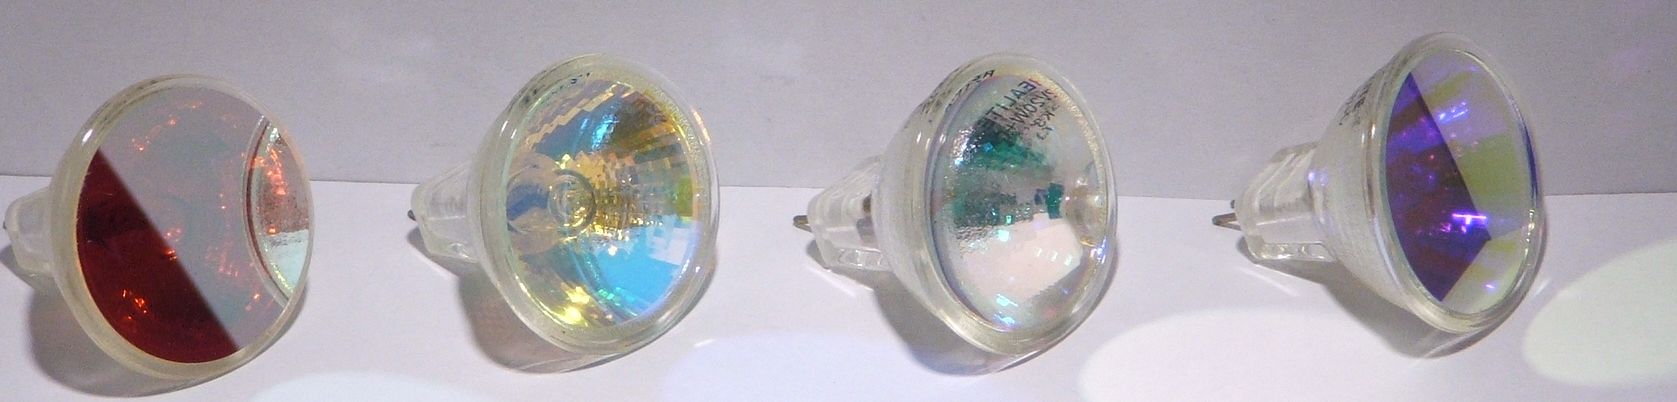 Realite MR11 Dichroic 20W 10 Degree Coloured Lamp - Detail showing highly reflective colour shifting effect of the dichroic colour filters